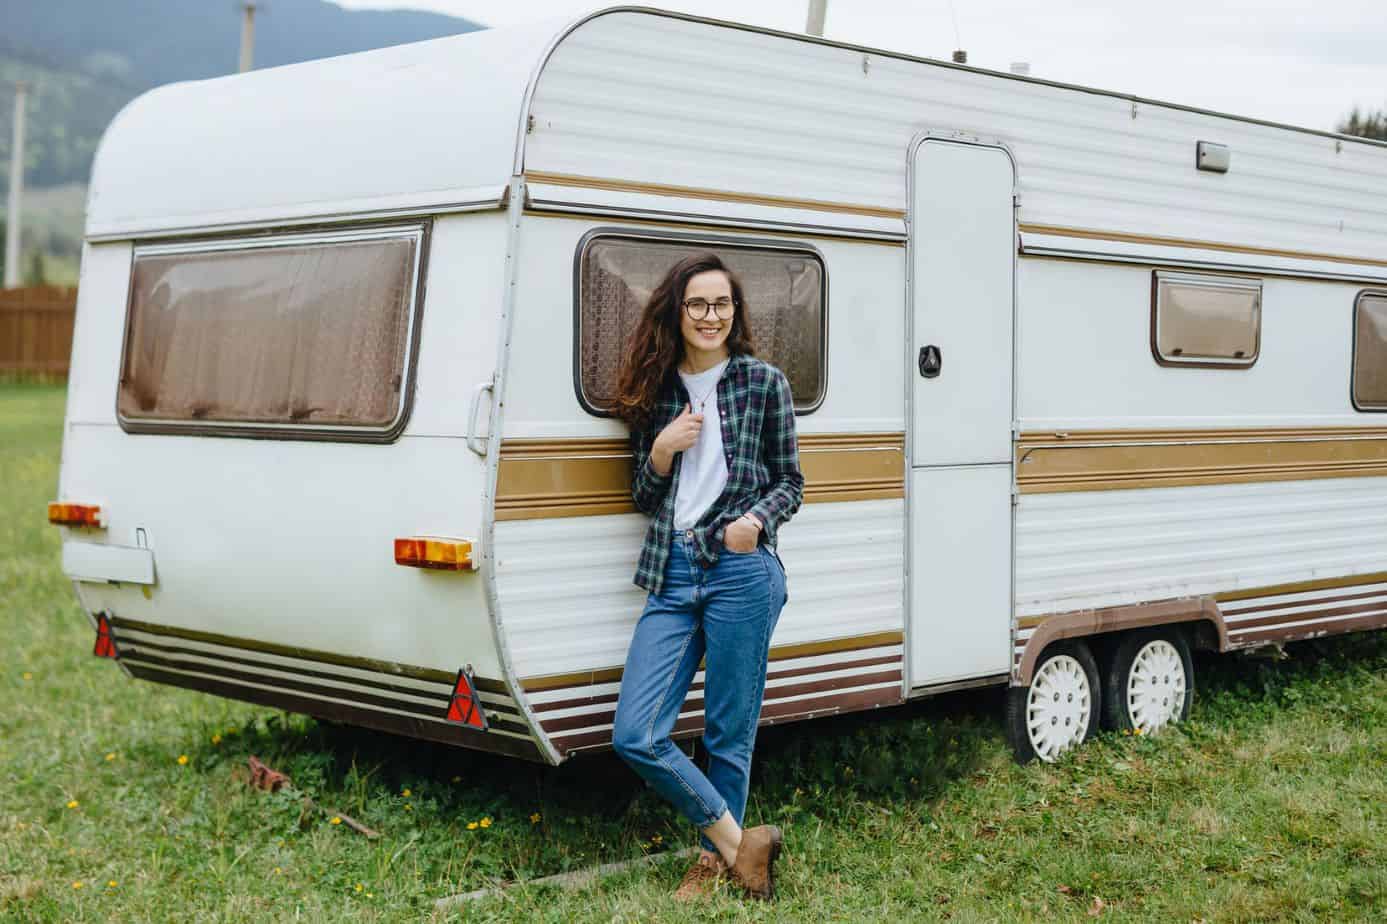 What Are The Best Built Travel Trailers?